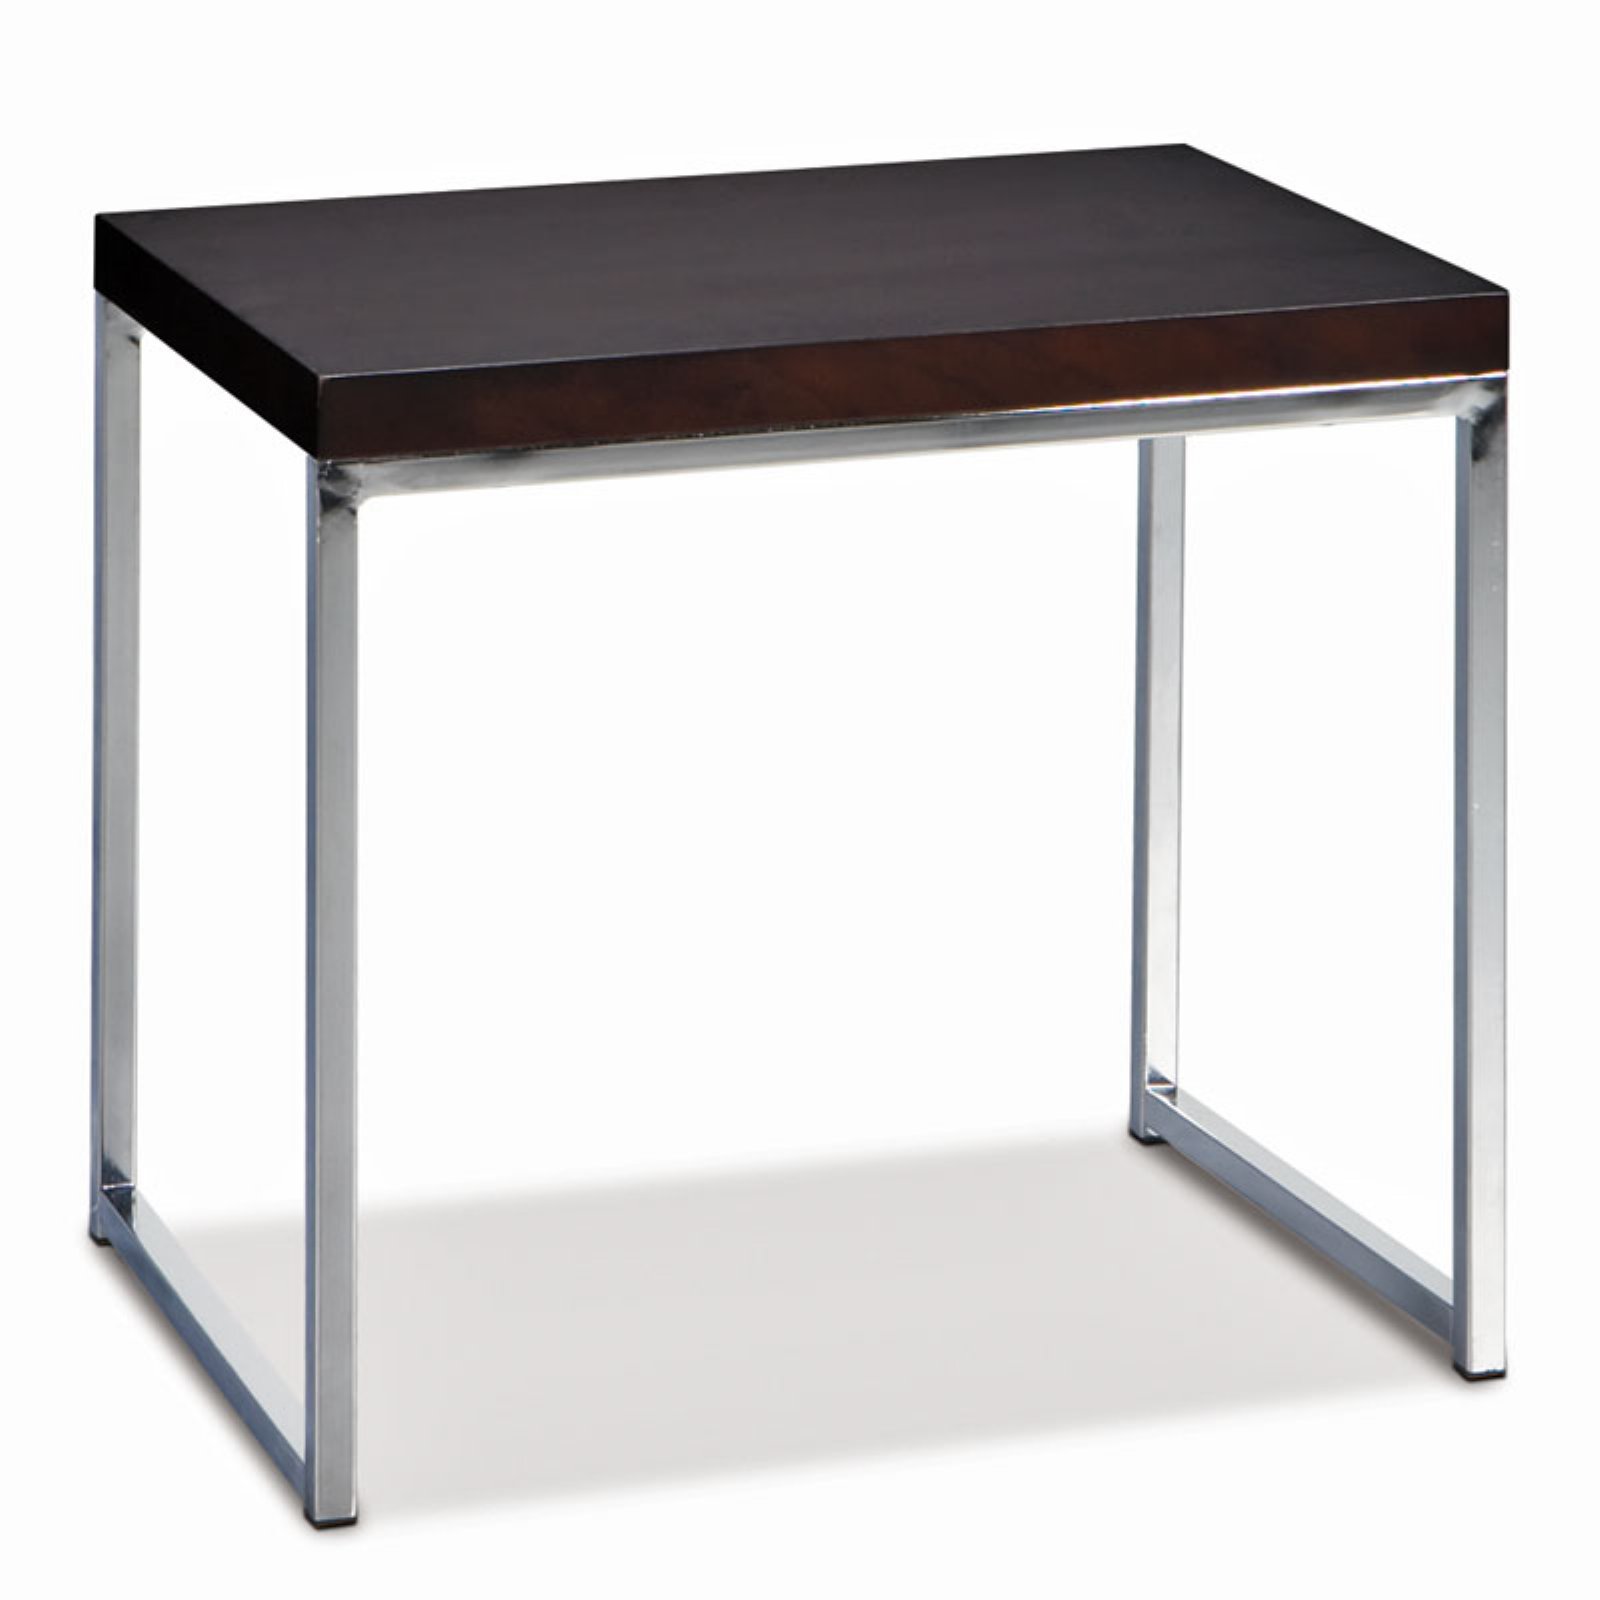 OSP Home Furnishings Wall Street End Table. Chrome/Espresso. - image 2 of 2